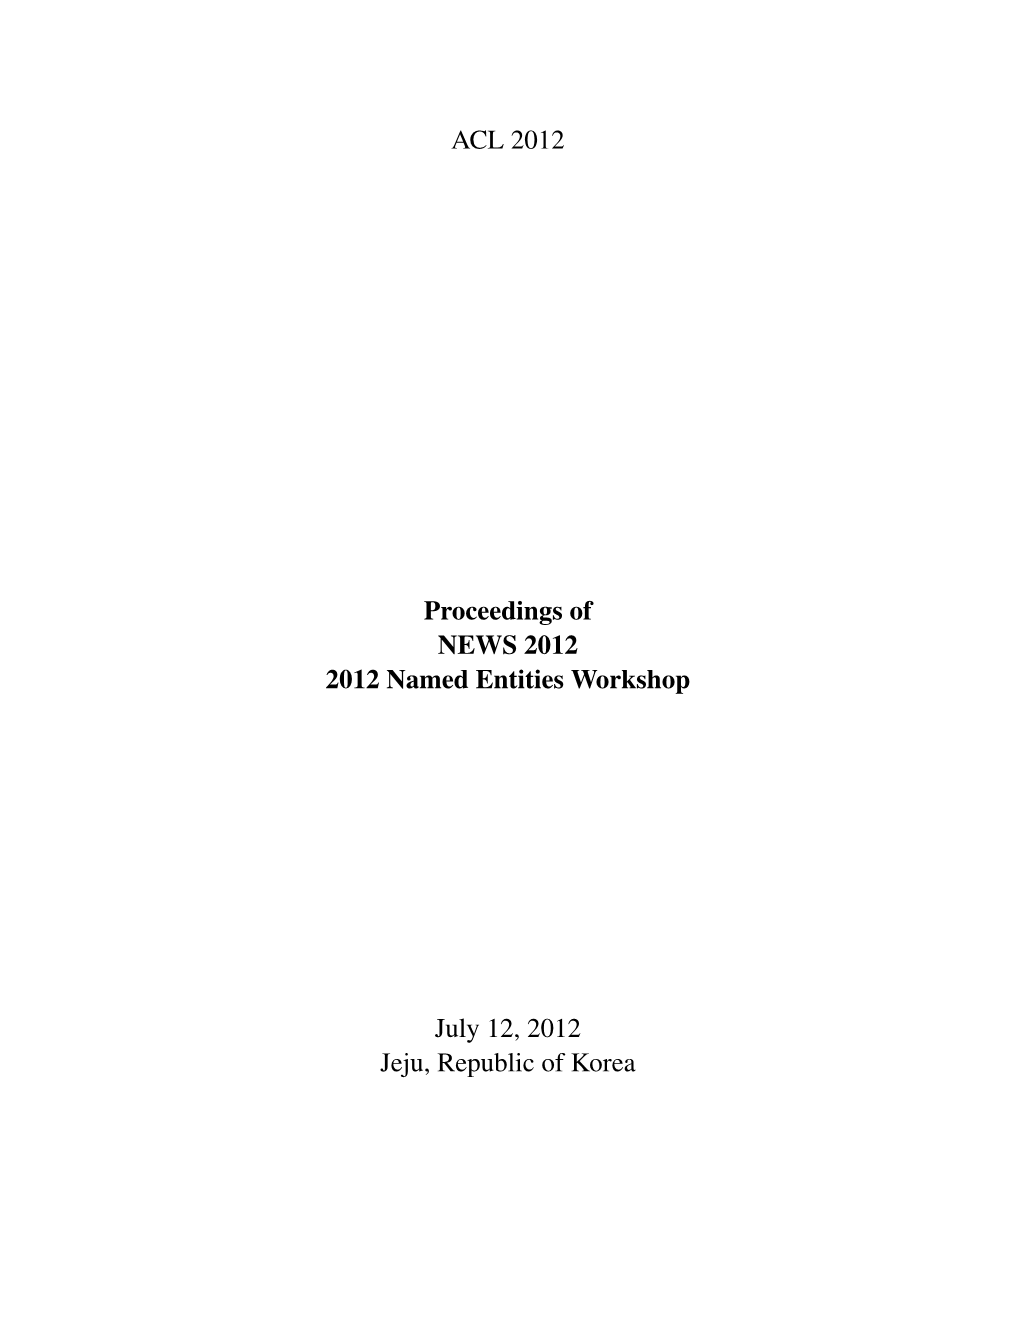 Proceedings of the 50Th Annual Meeting of the Association for Computational Linguistics, Pages 1–9, Jeju, Republic of Korea, 8-14 July 2012